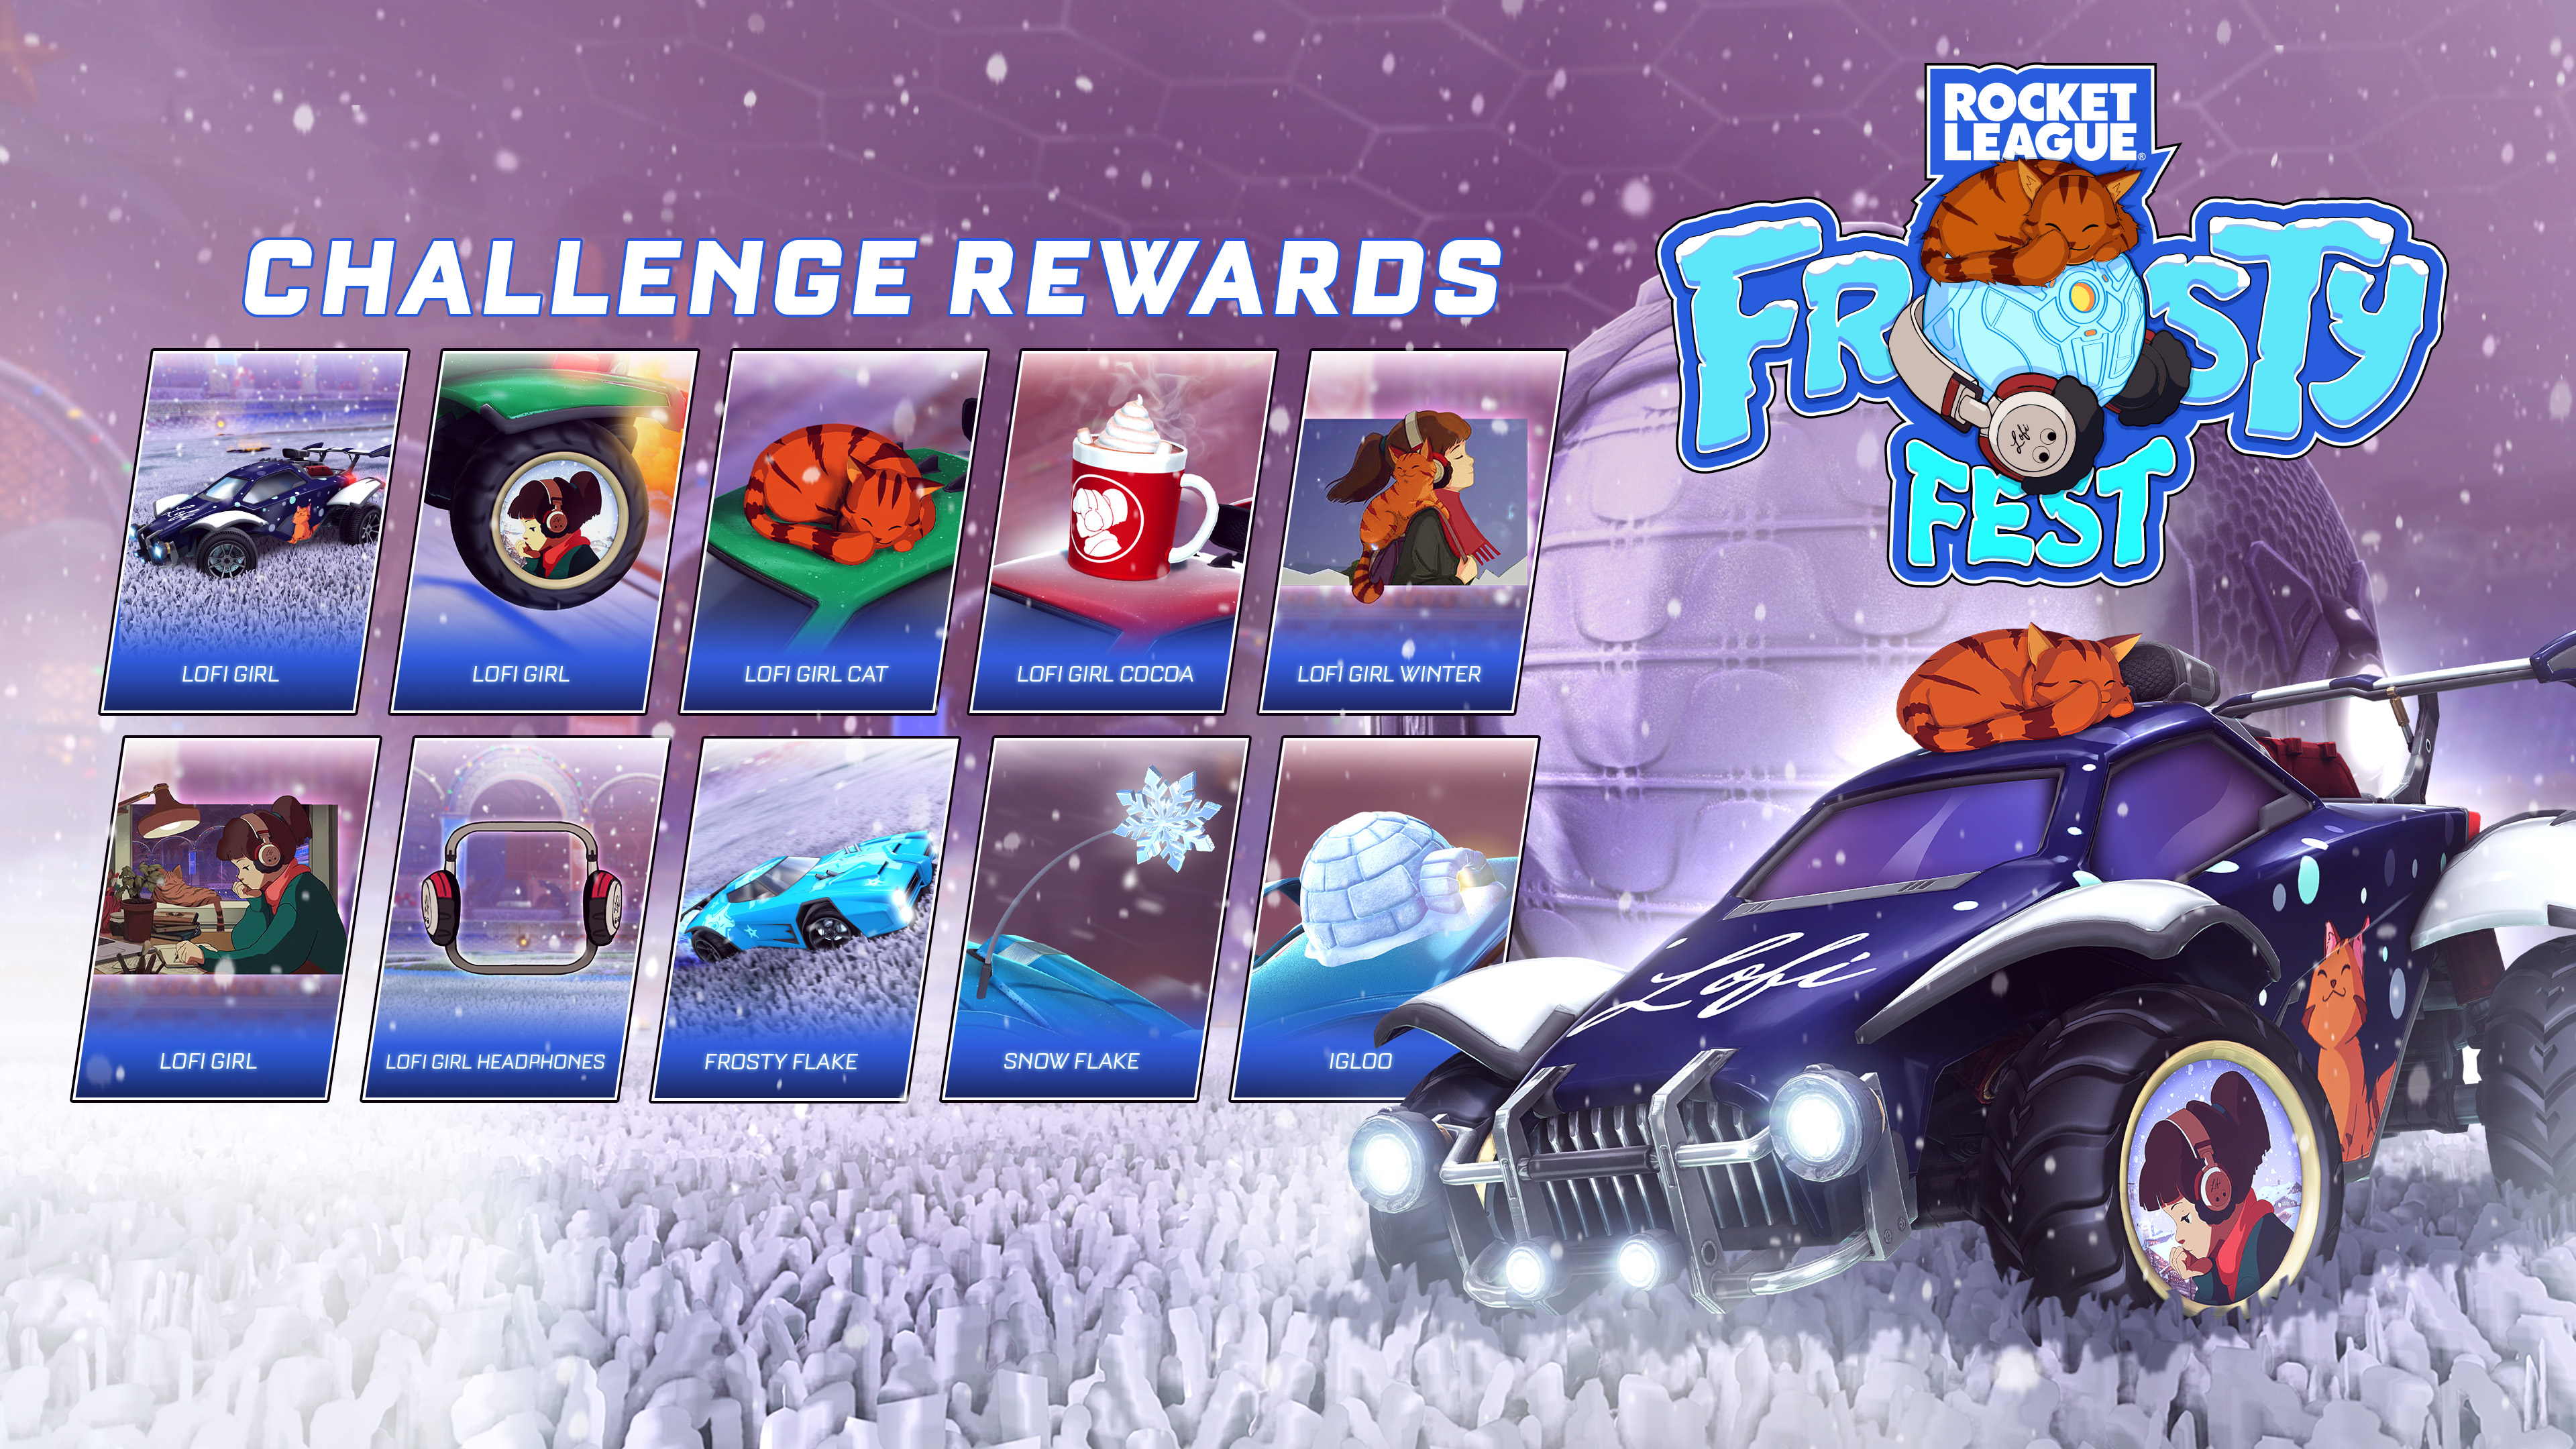 League on Twitter: "Frosty Fest is here 🥶☃️! Start completing your challenges to earn these winter-themed / Twitter